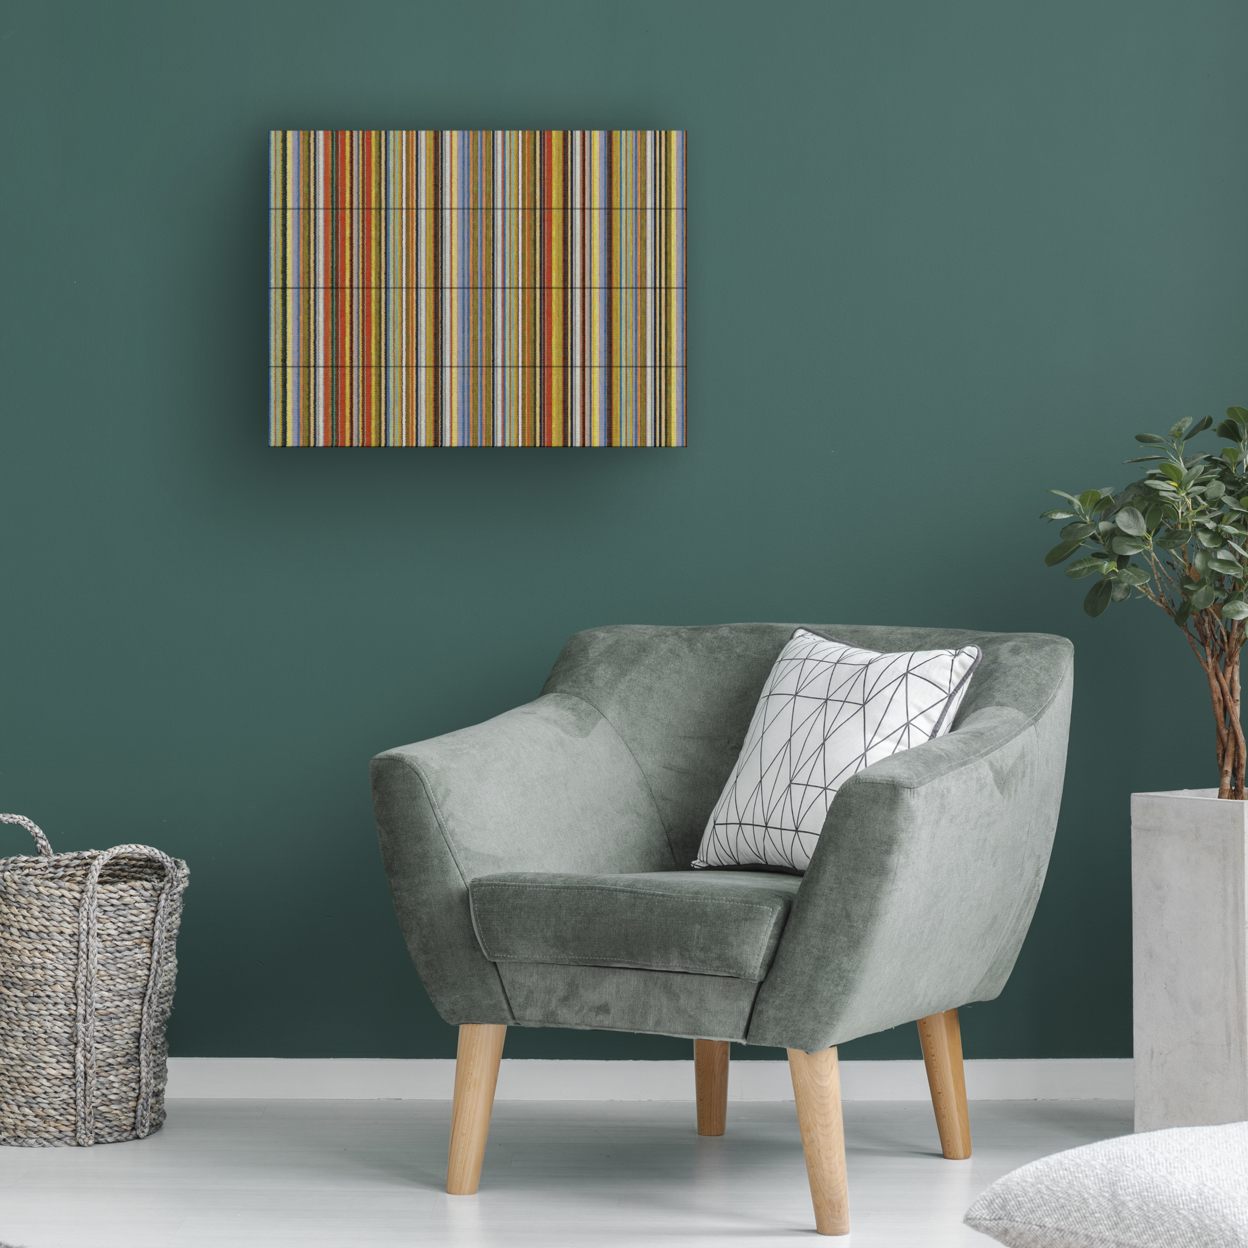 Wall Art 12 X 16 Inches Titled Comfortable Stripes VII Ready To Hang Printed On Wooden Planks